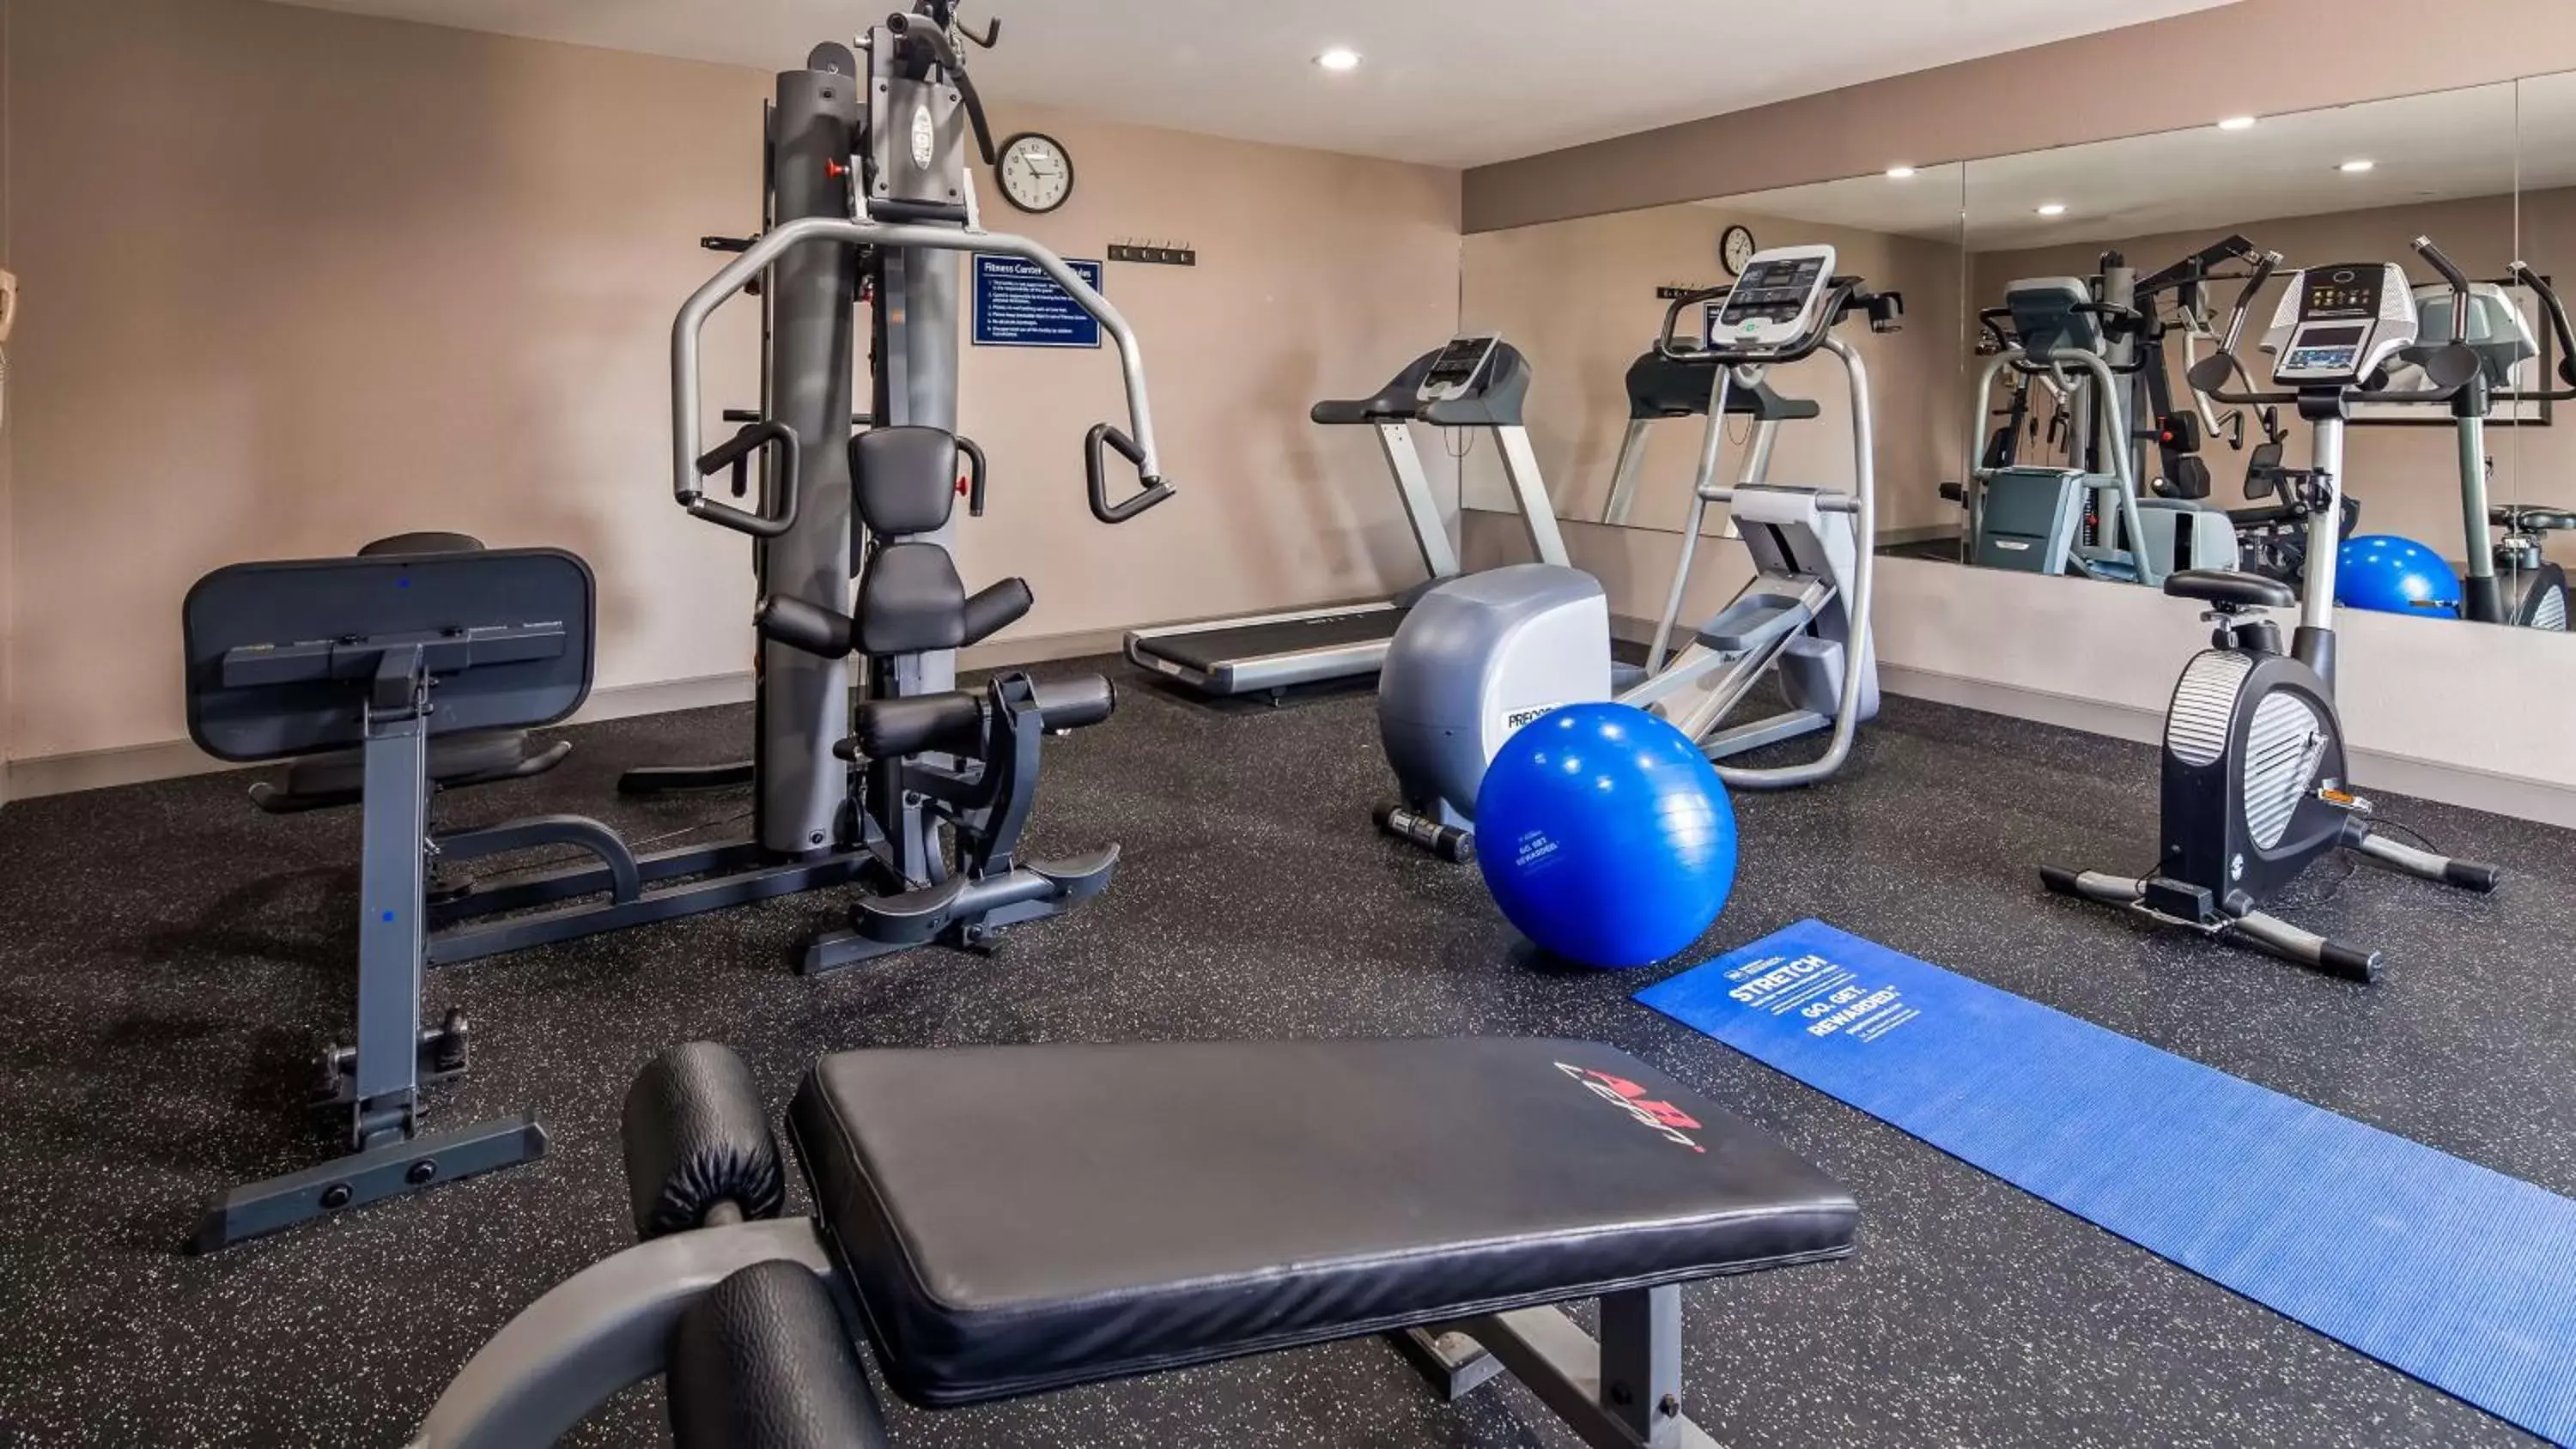 Fitness centre/facilities, Fitness Center/Facilities in Best Western Lafayette Inn